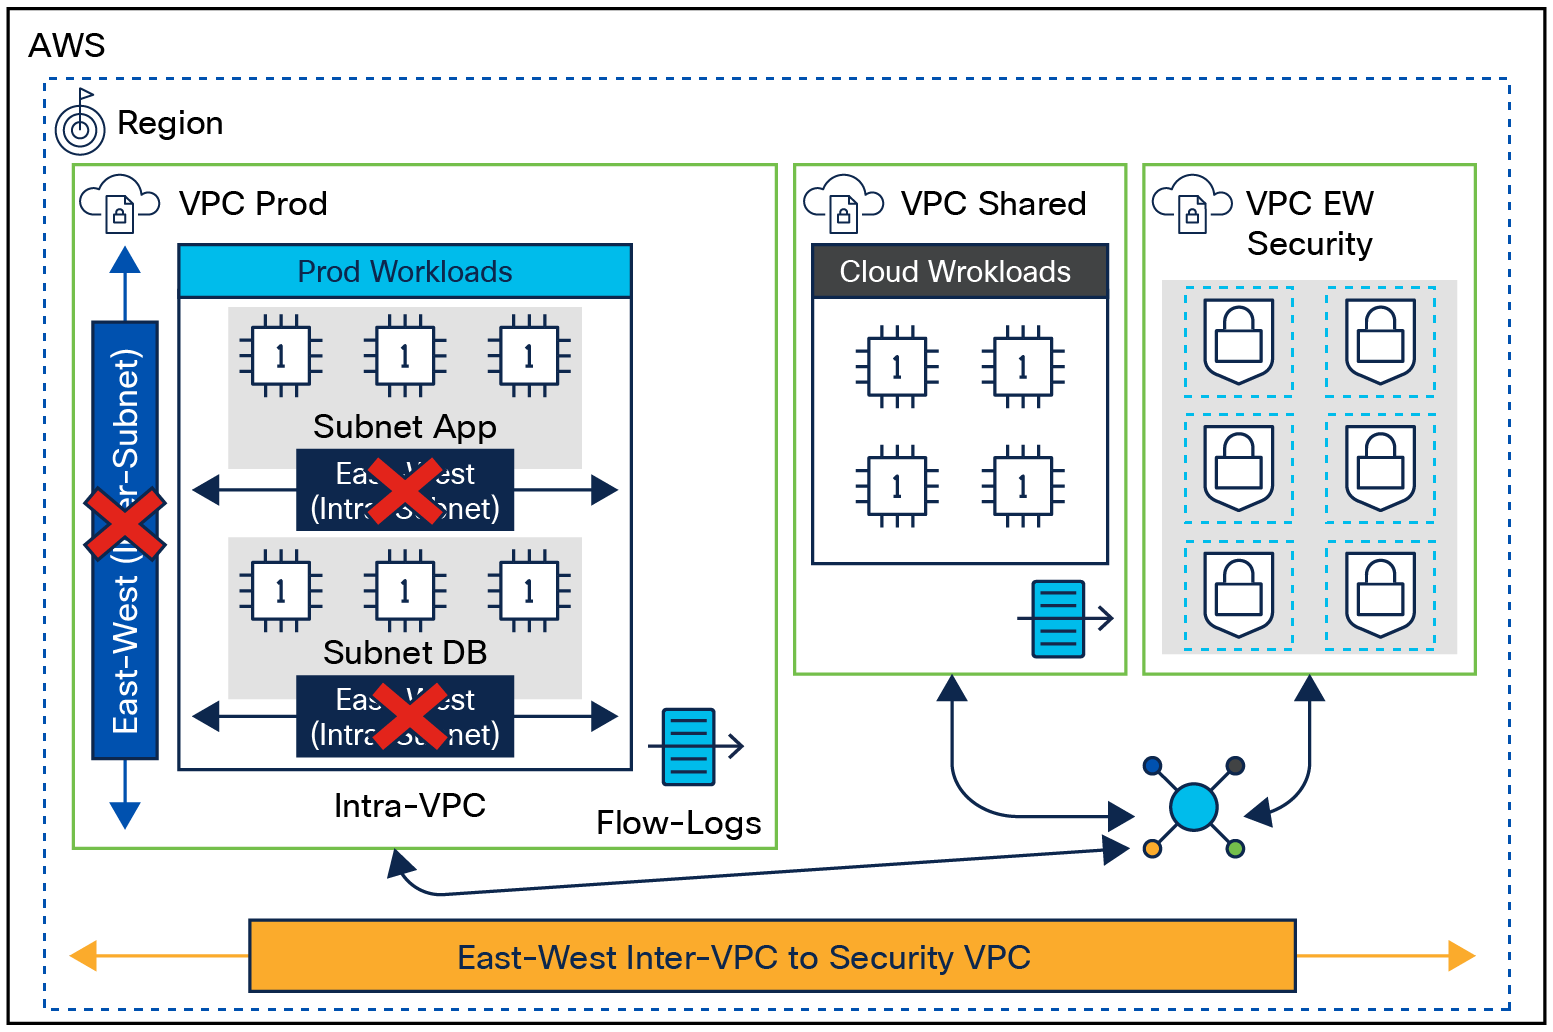 Network Microsegmentation for Cloud Agentless Workloads with Centralized/Hub VPC Secure Firewall Deployment on AWS